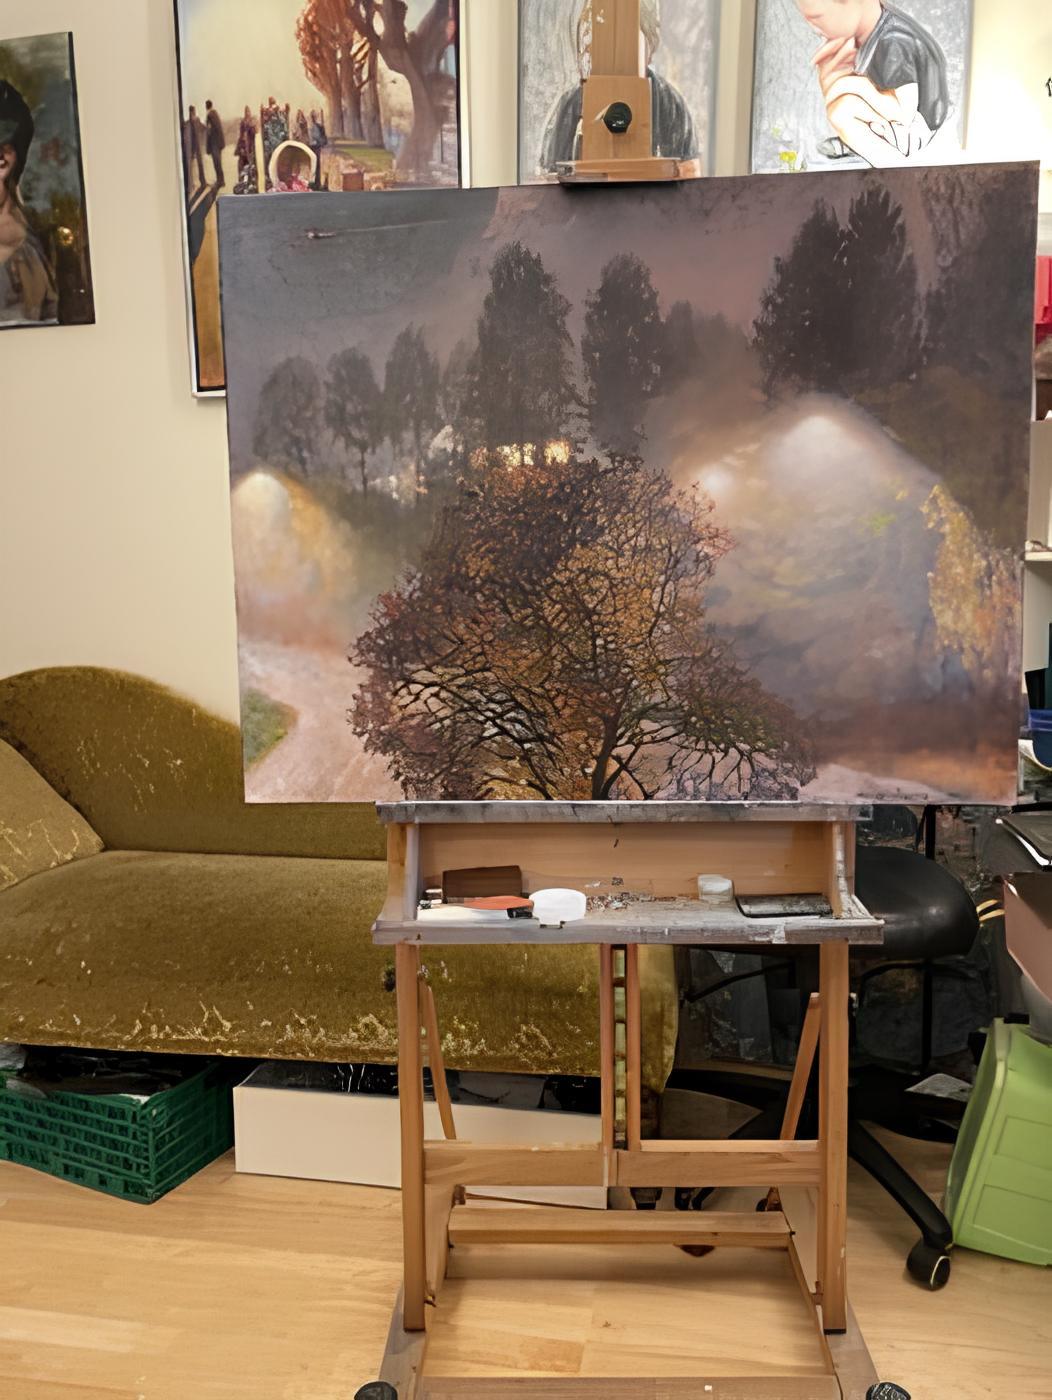 In this oil painting, I aimed to capture the tranquil yet mysterious essence of a nighttime scene, viewed as if through a window. My brushstrokes, shaped by impressionism, blend light and shadow, weaving a tapestry of quiet introspection and the